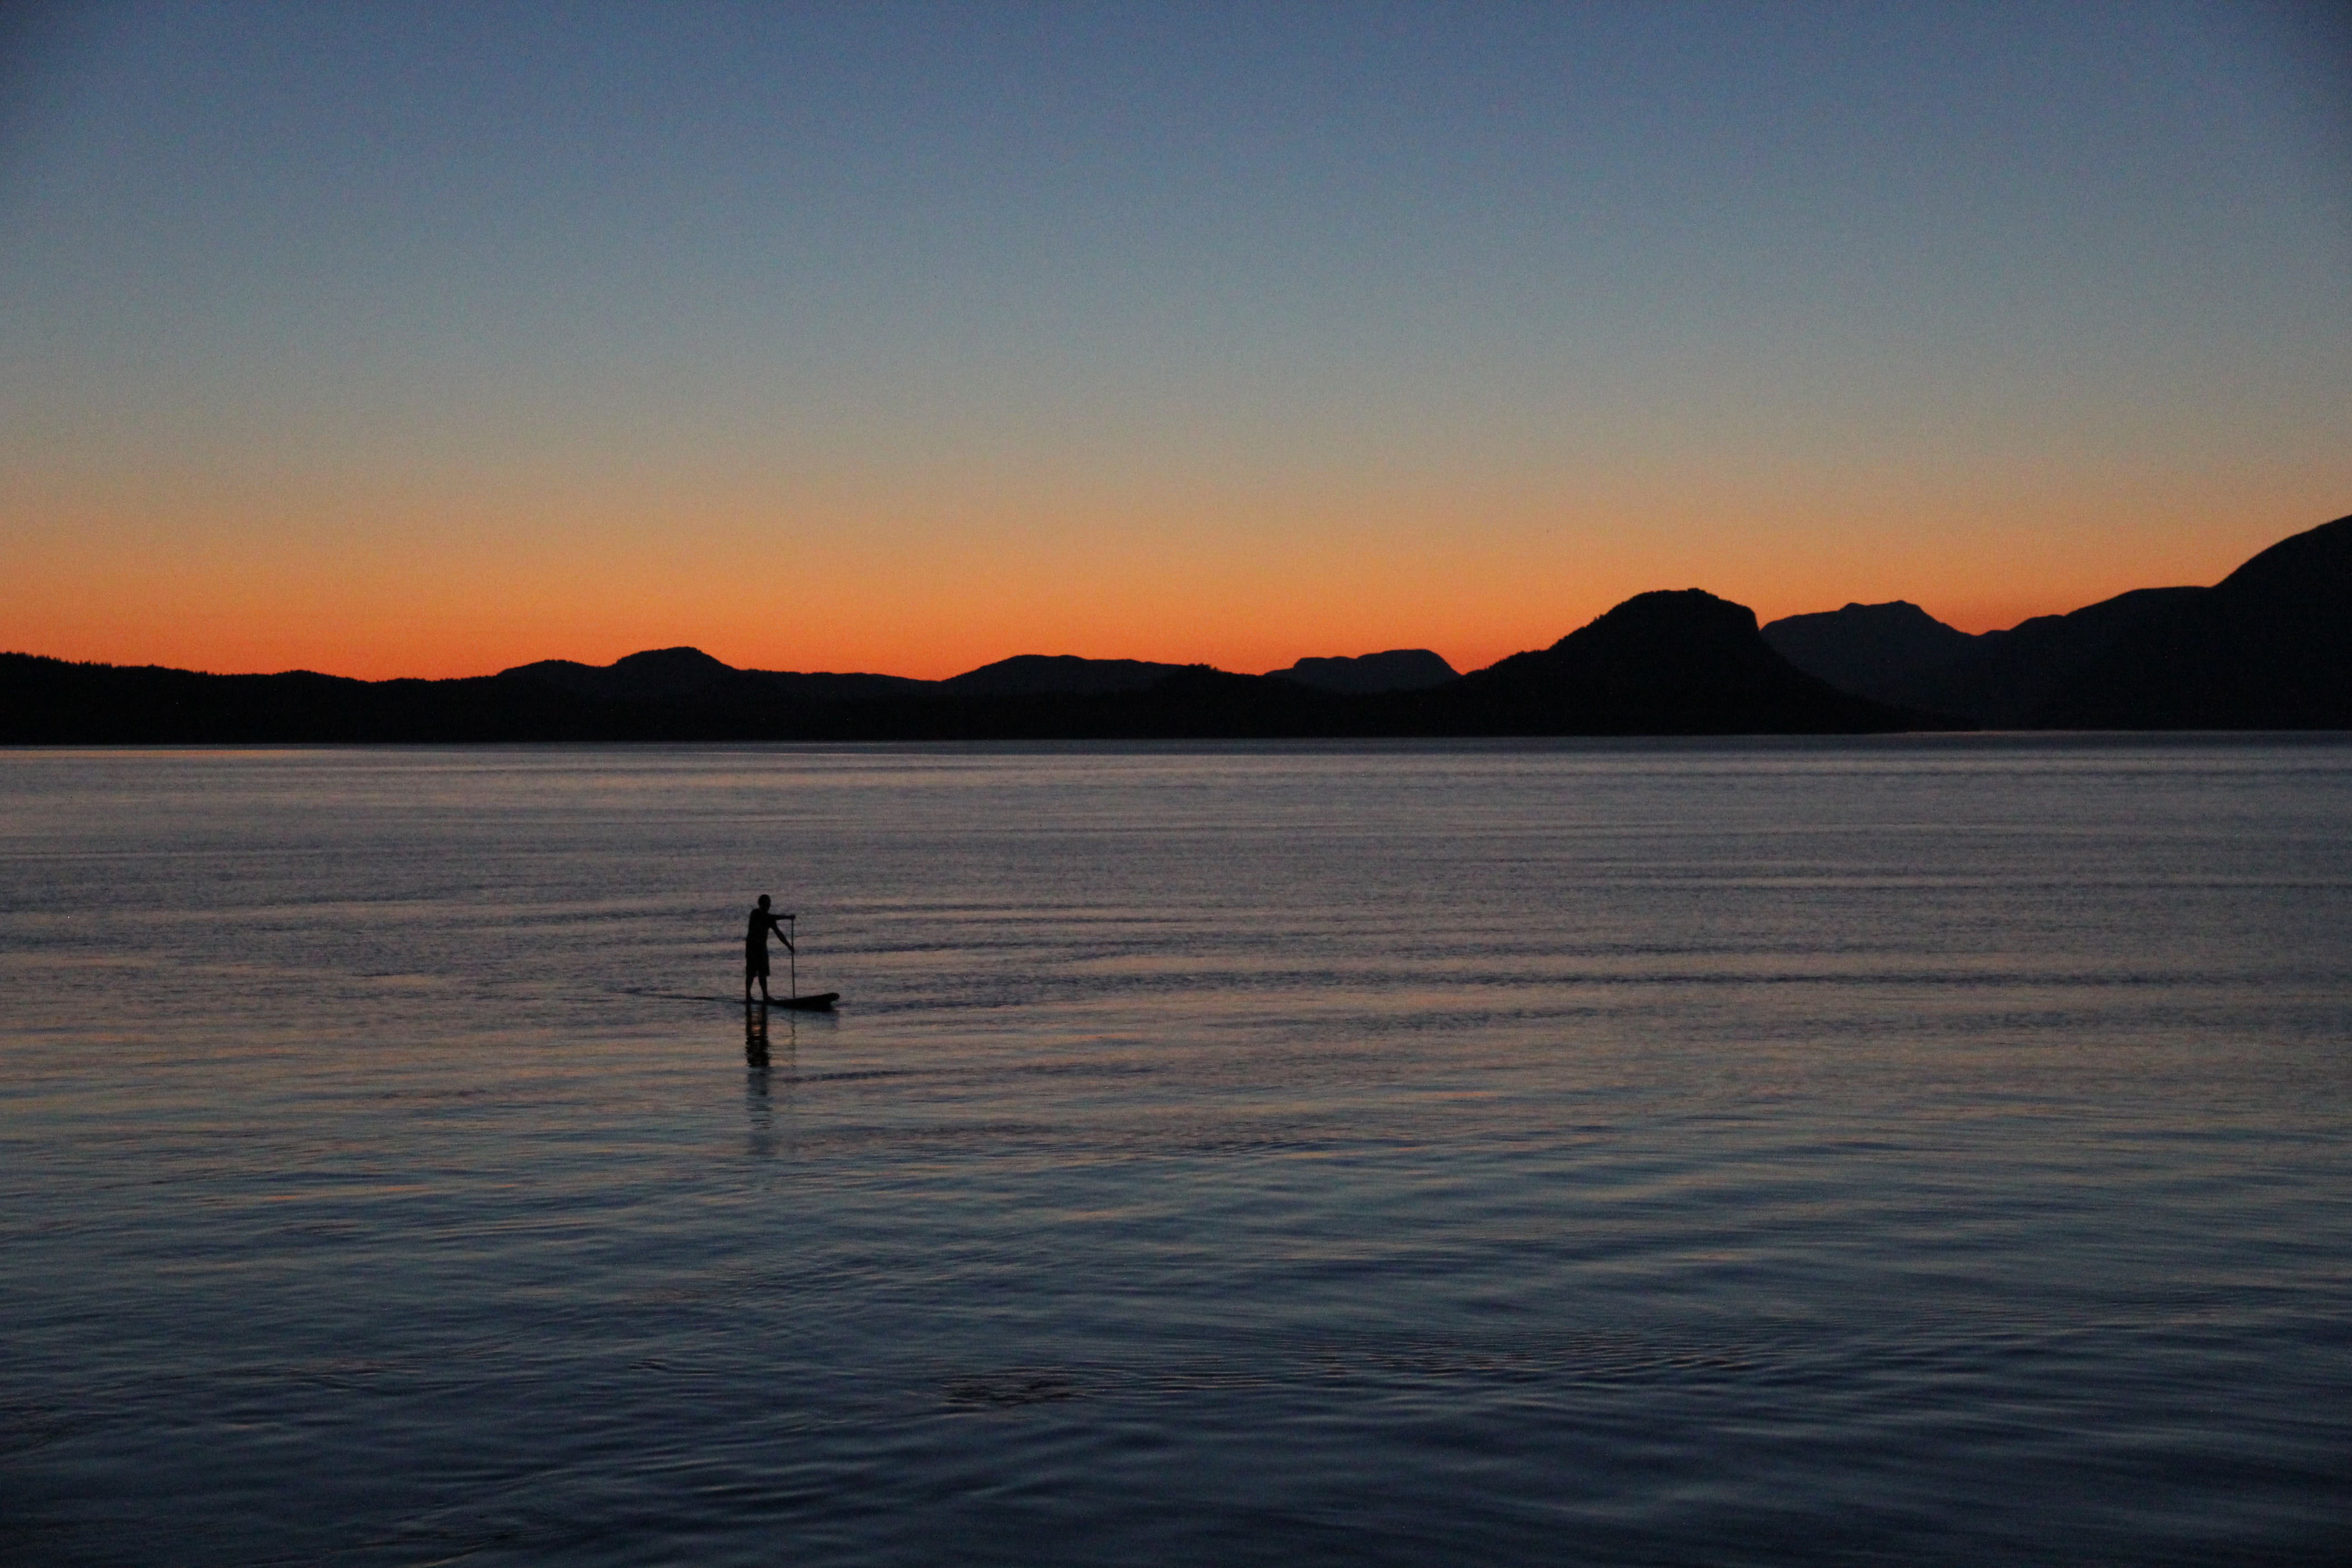 A guest paddle boarding as the sun sets on coastal British Columbia